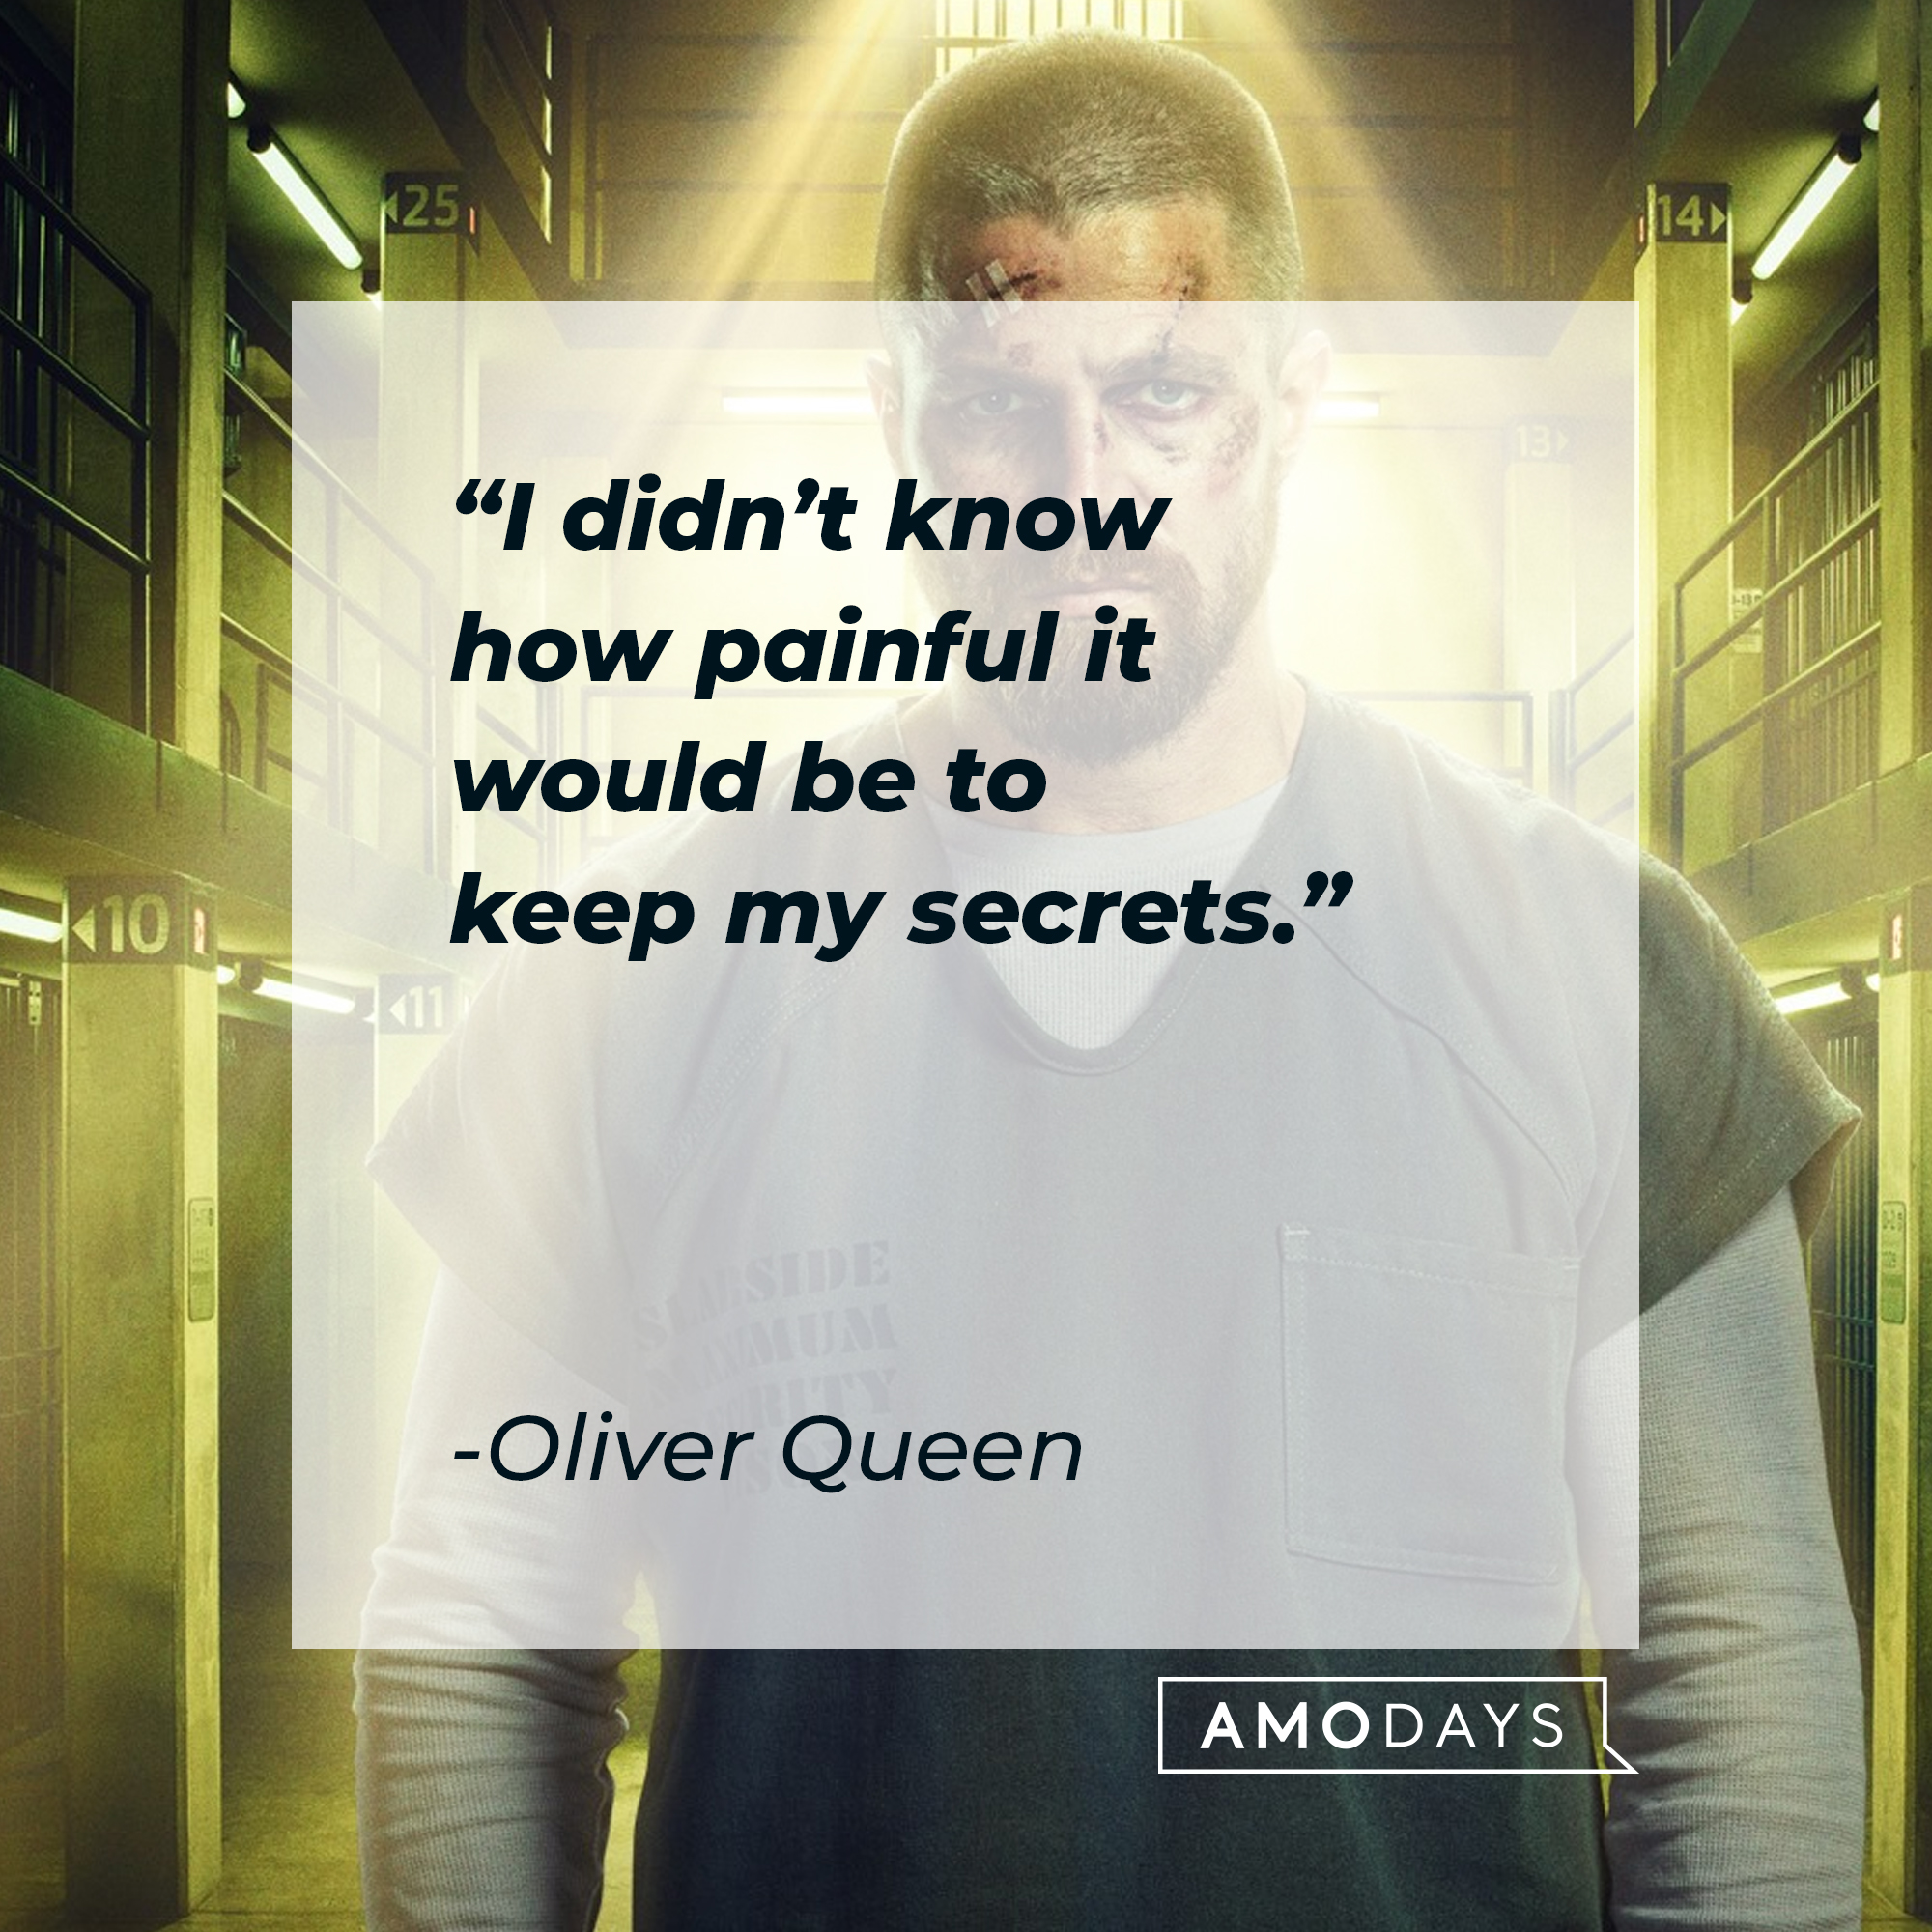 An image of Oliver Queen with his quote: “I didn’t know how painful it would be to keep my secrets.” | Source: facebook.com/CWArrow